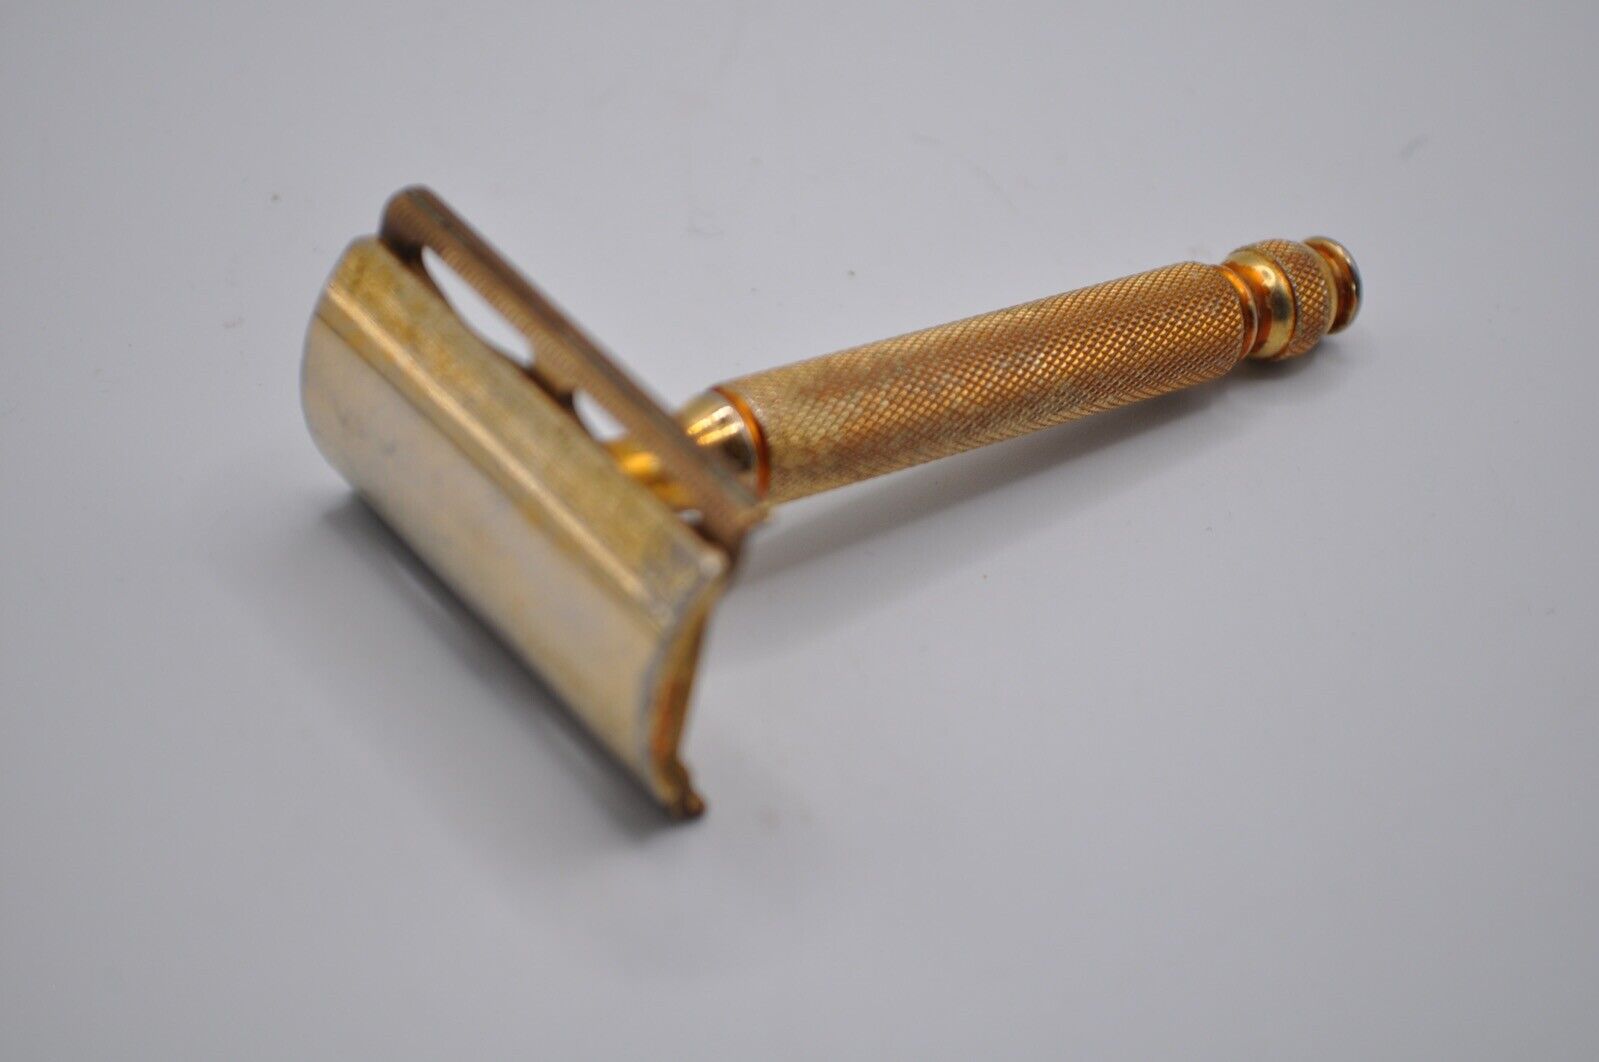 Vintage Gillette Razor Gold Toned US Patent Off Made in USA No Date Code